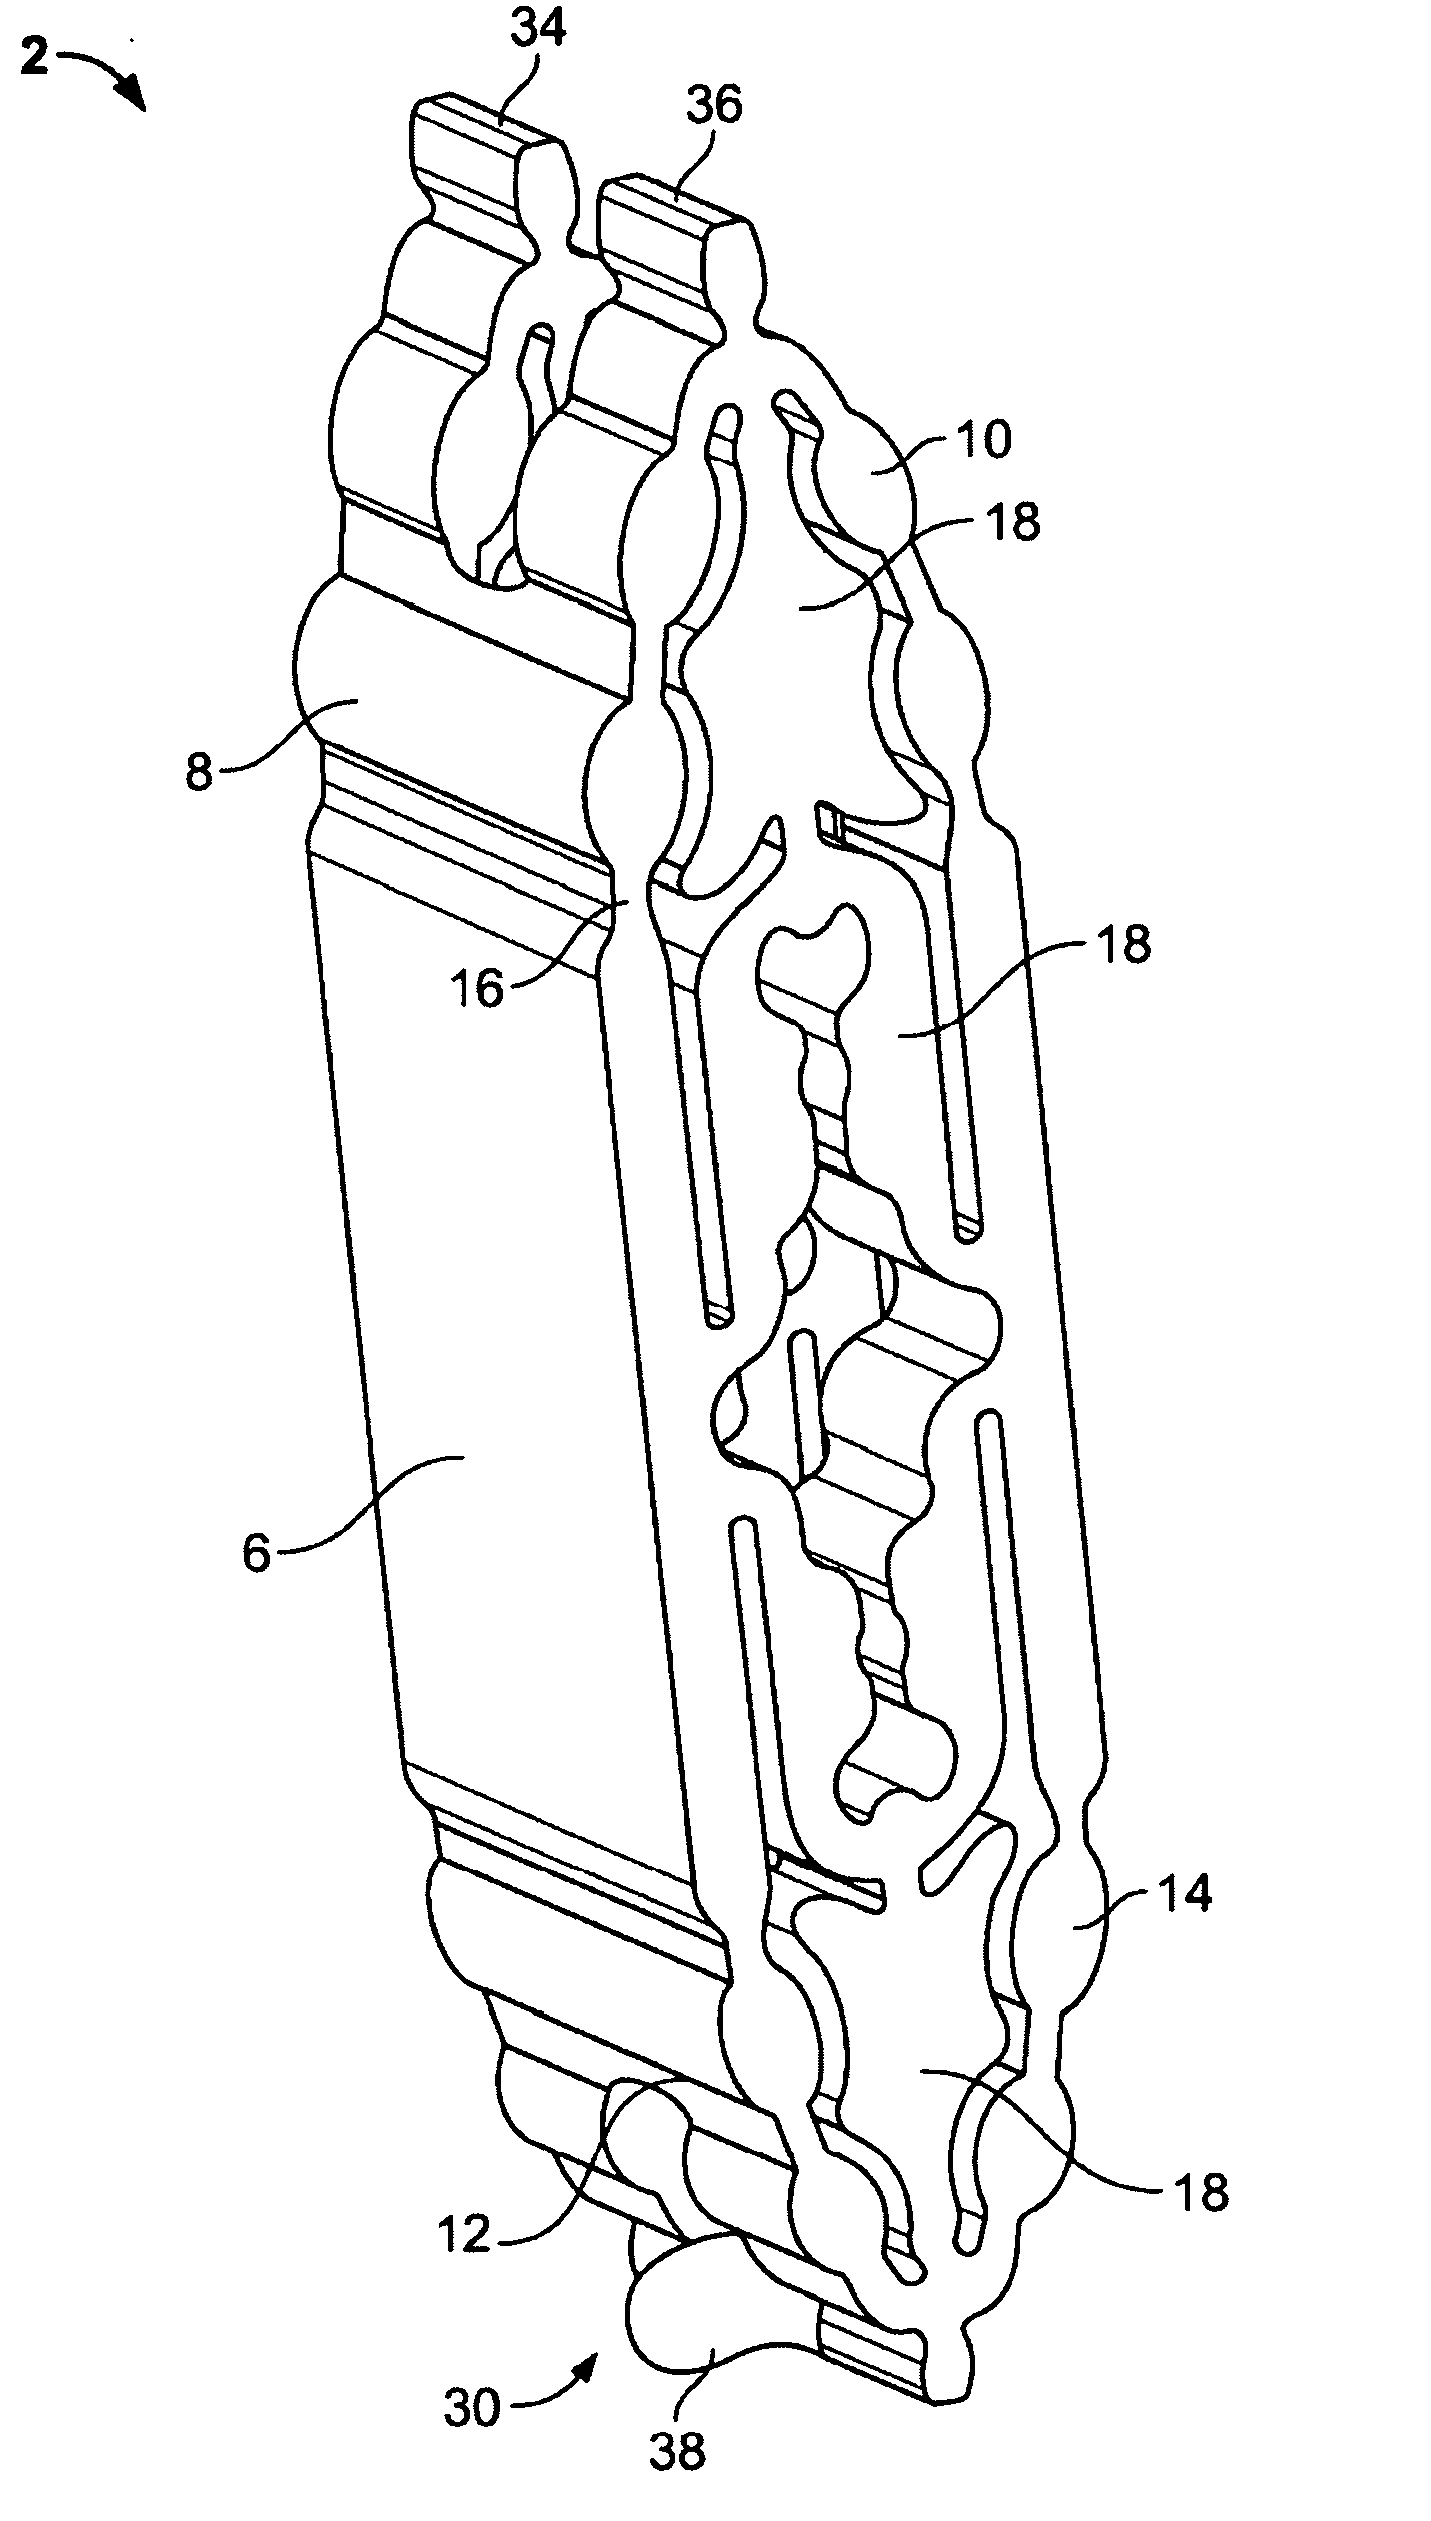 Expandable support device